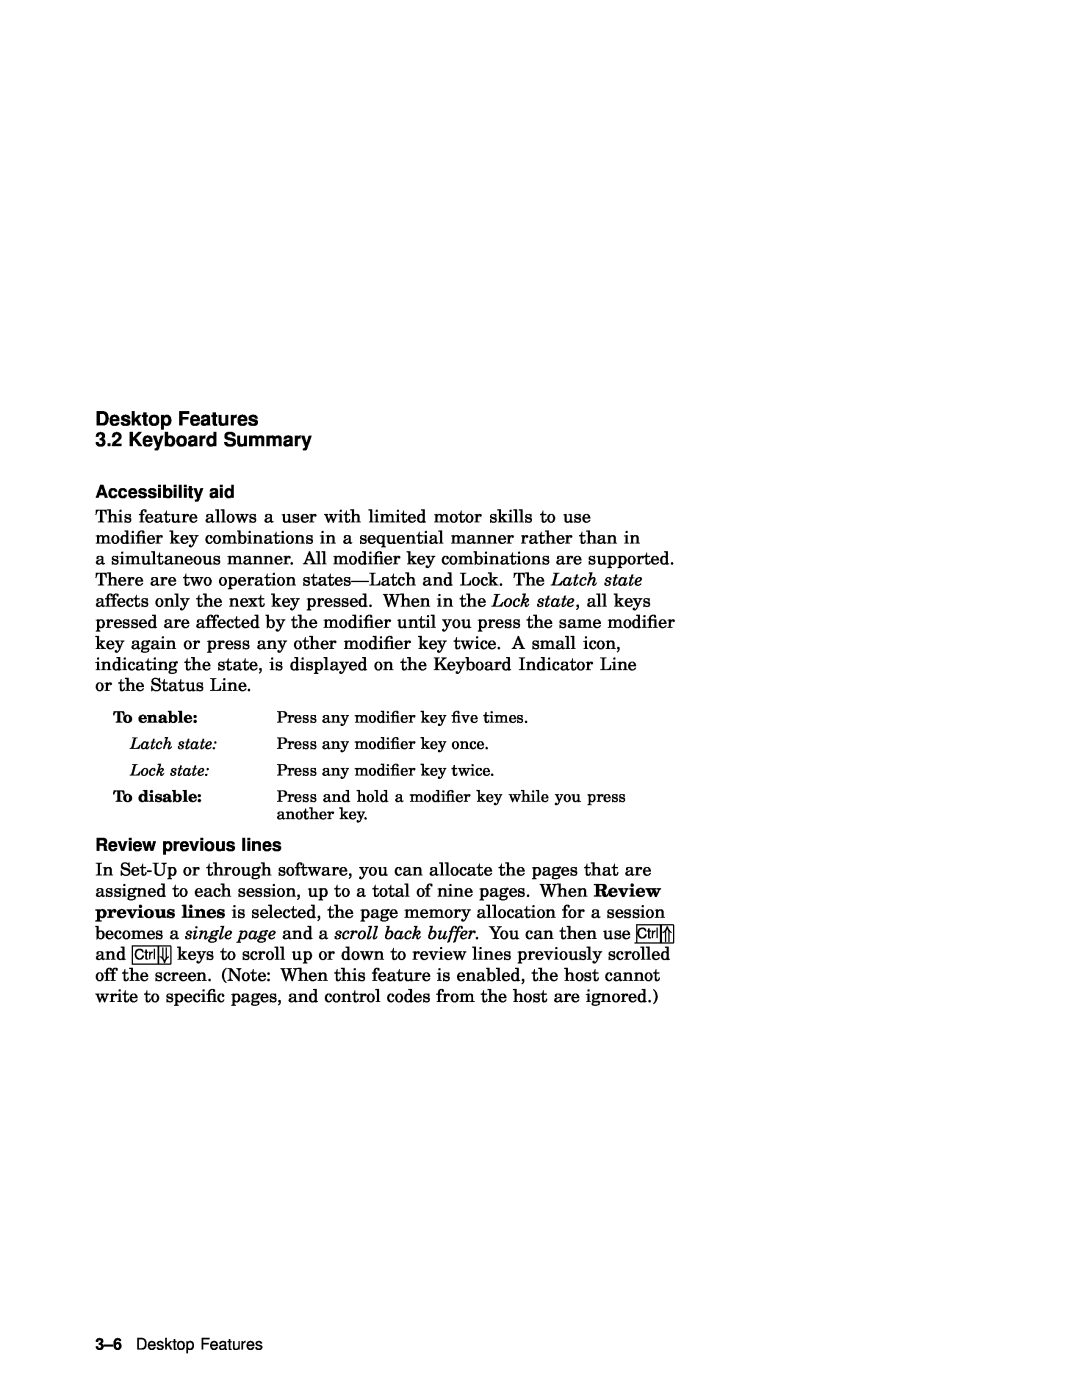 IBM WS525 manual Accessibility aid, Review previous lines, Desktop Features 3.2 Keyboard Summary 